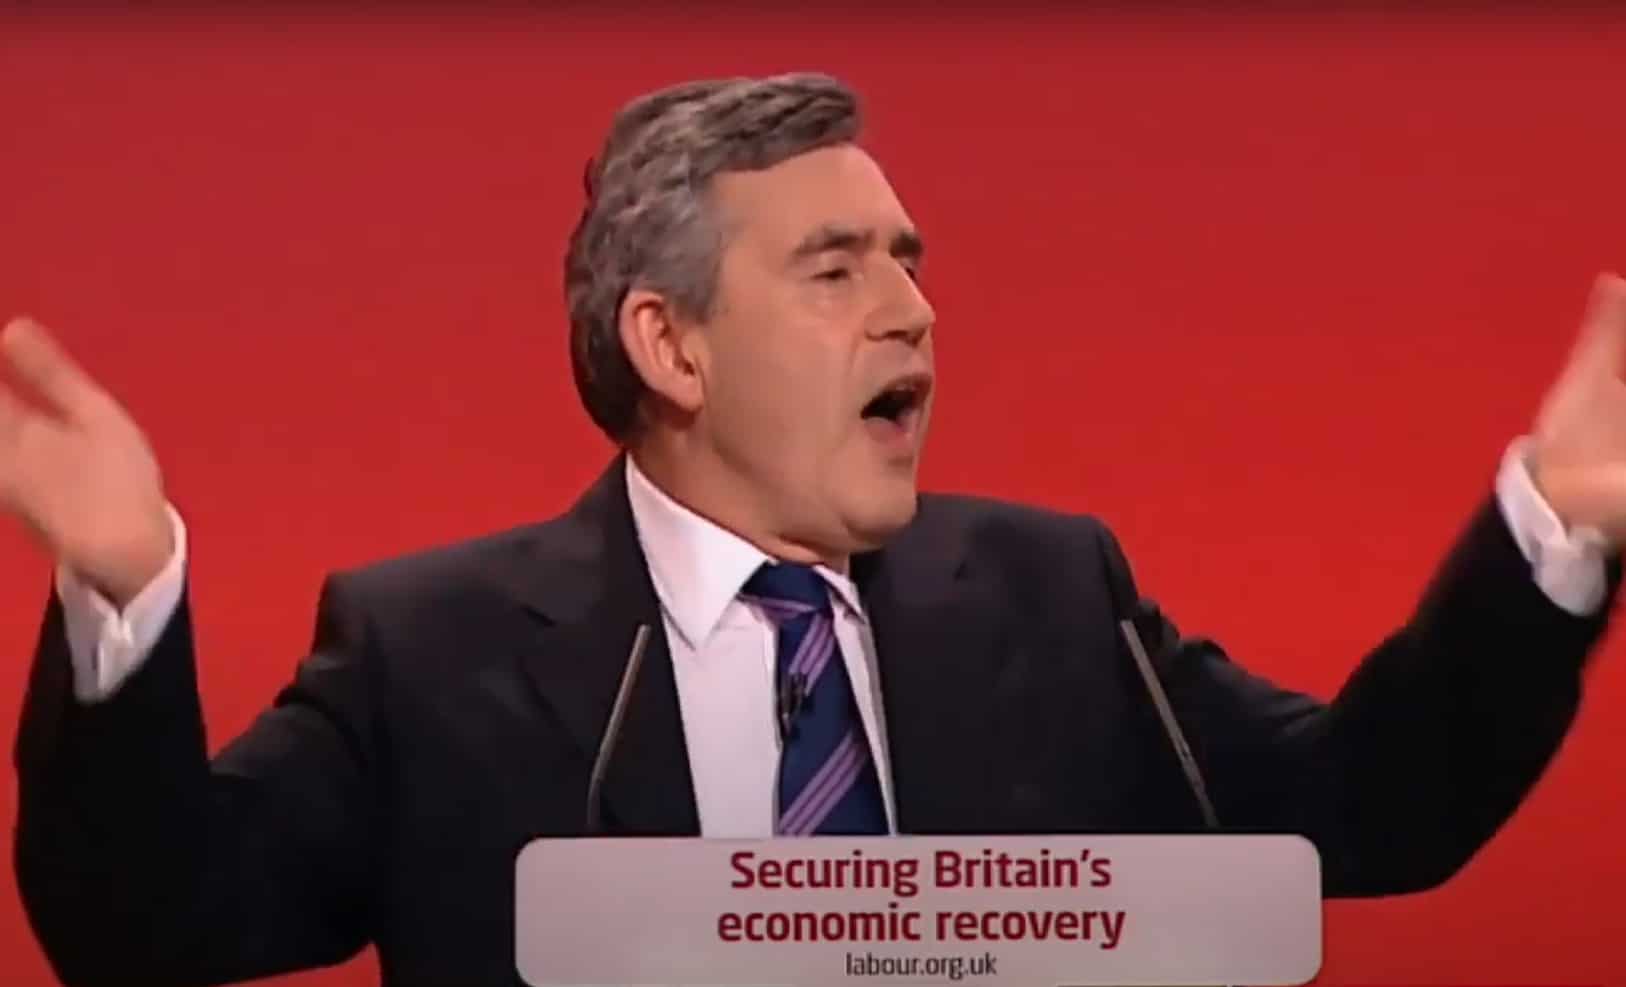 Flashback: To Gordon Brown listing what New Labour achieved in government